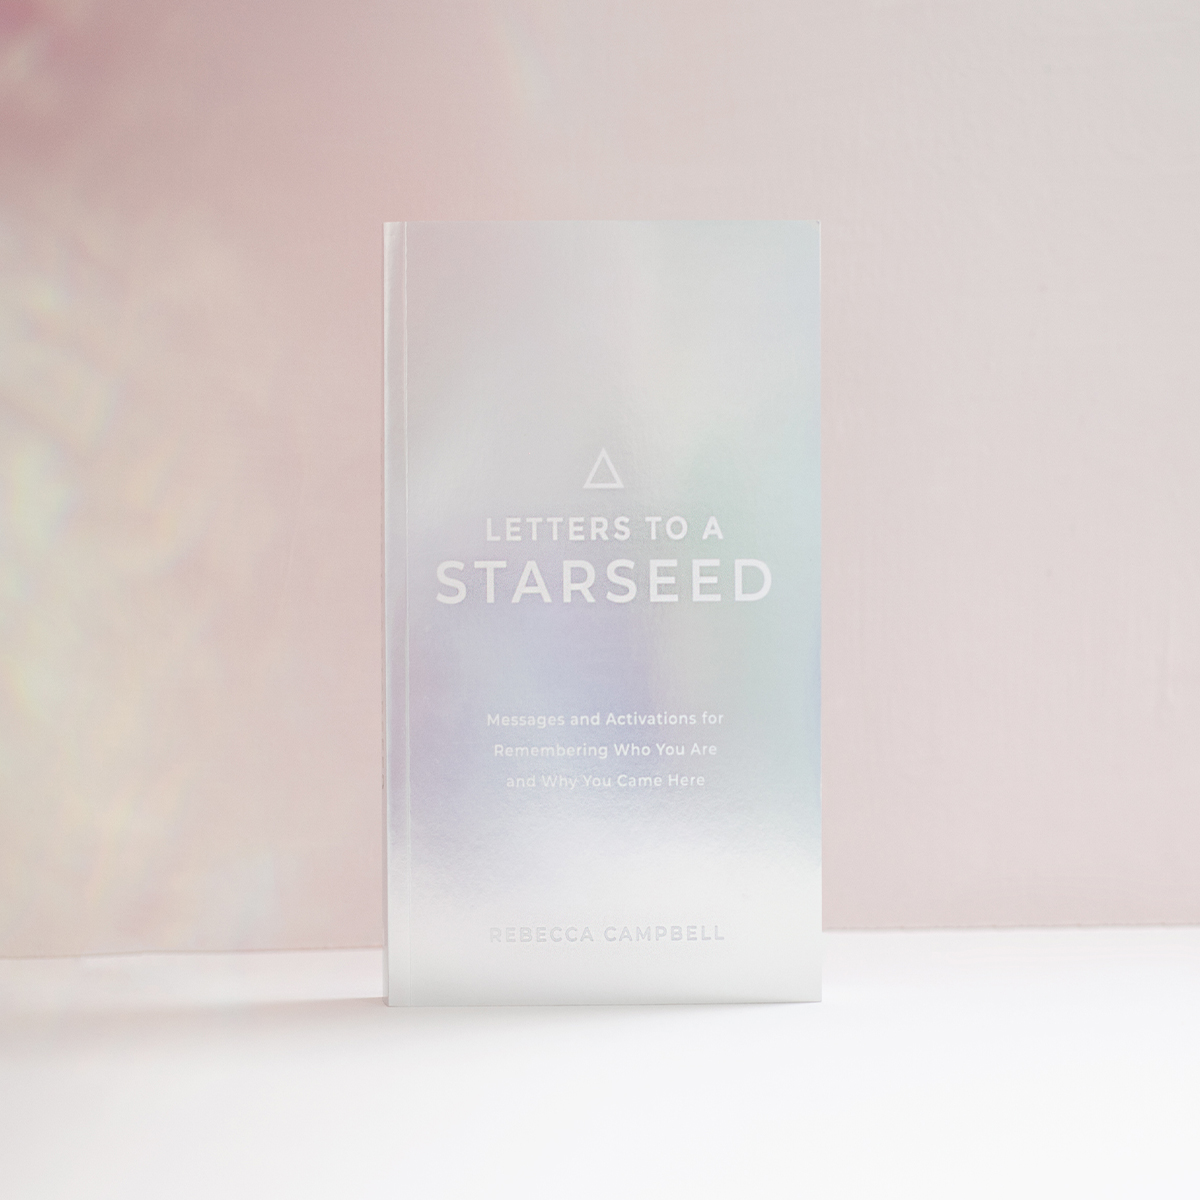 Letters To A Starseed by Rebecca Campbell